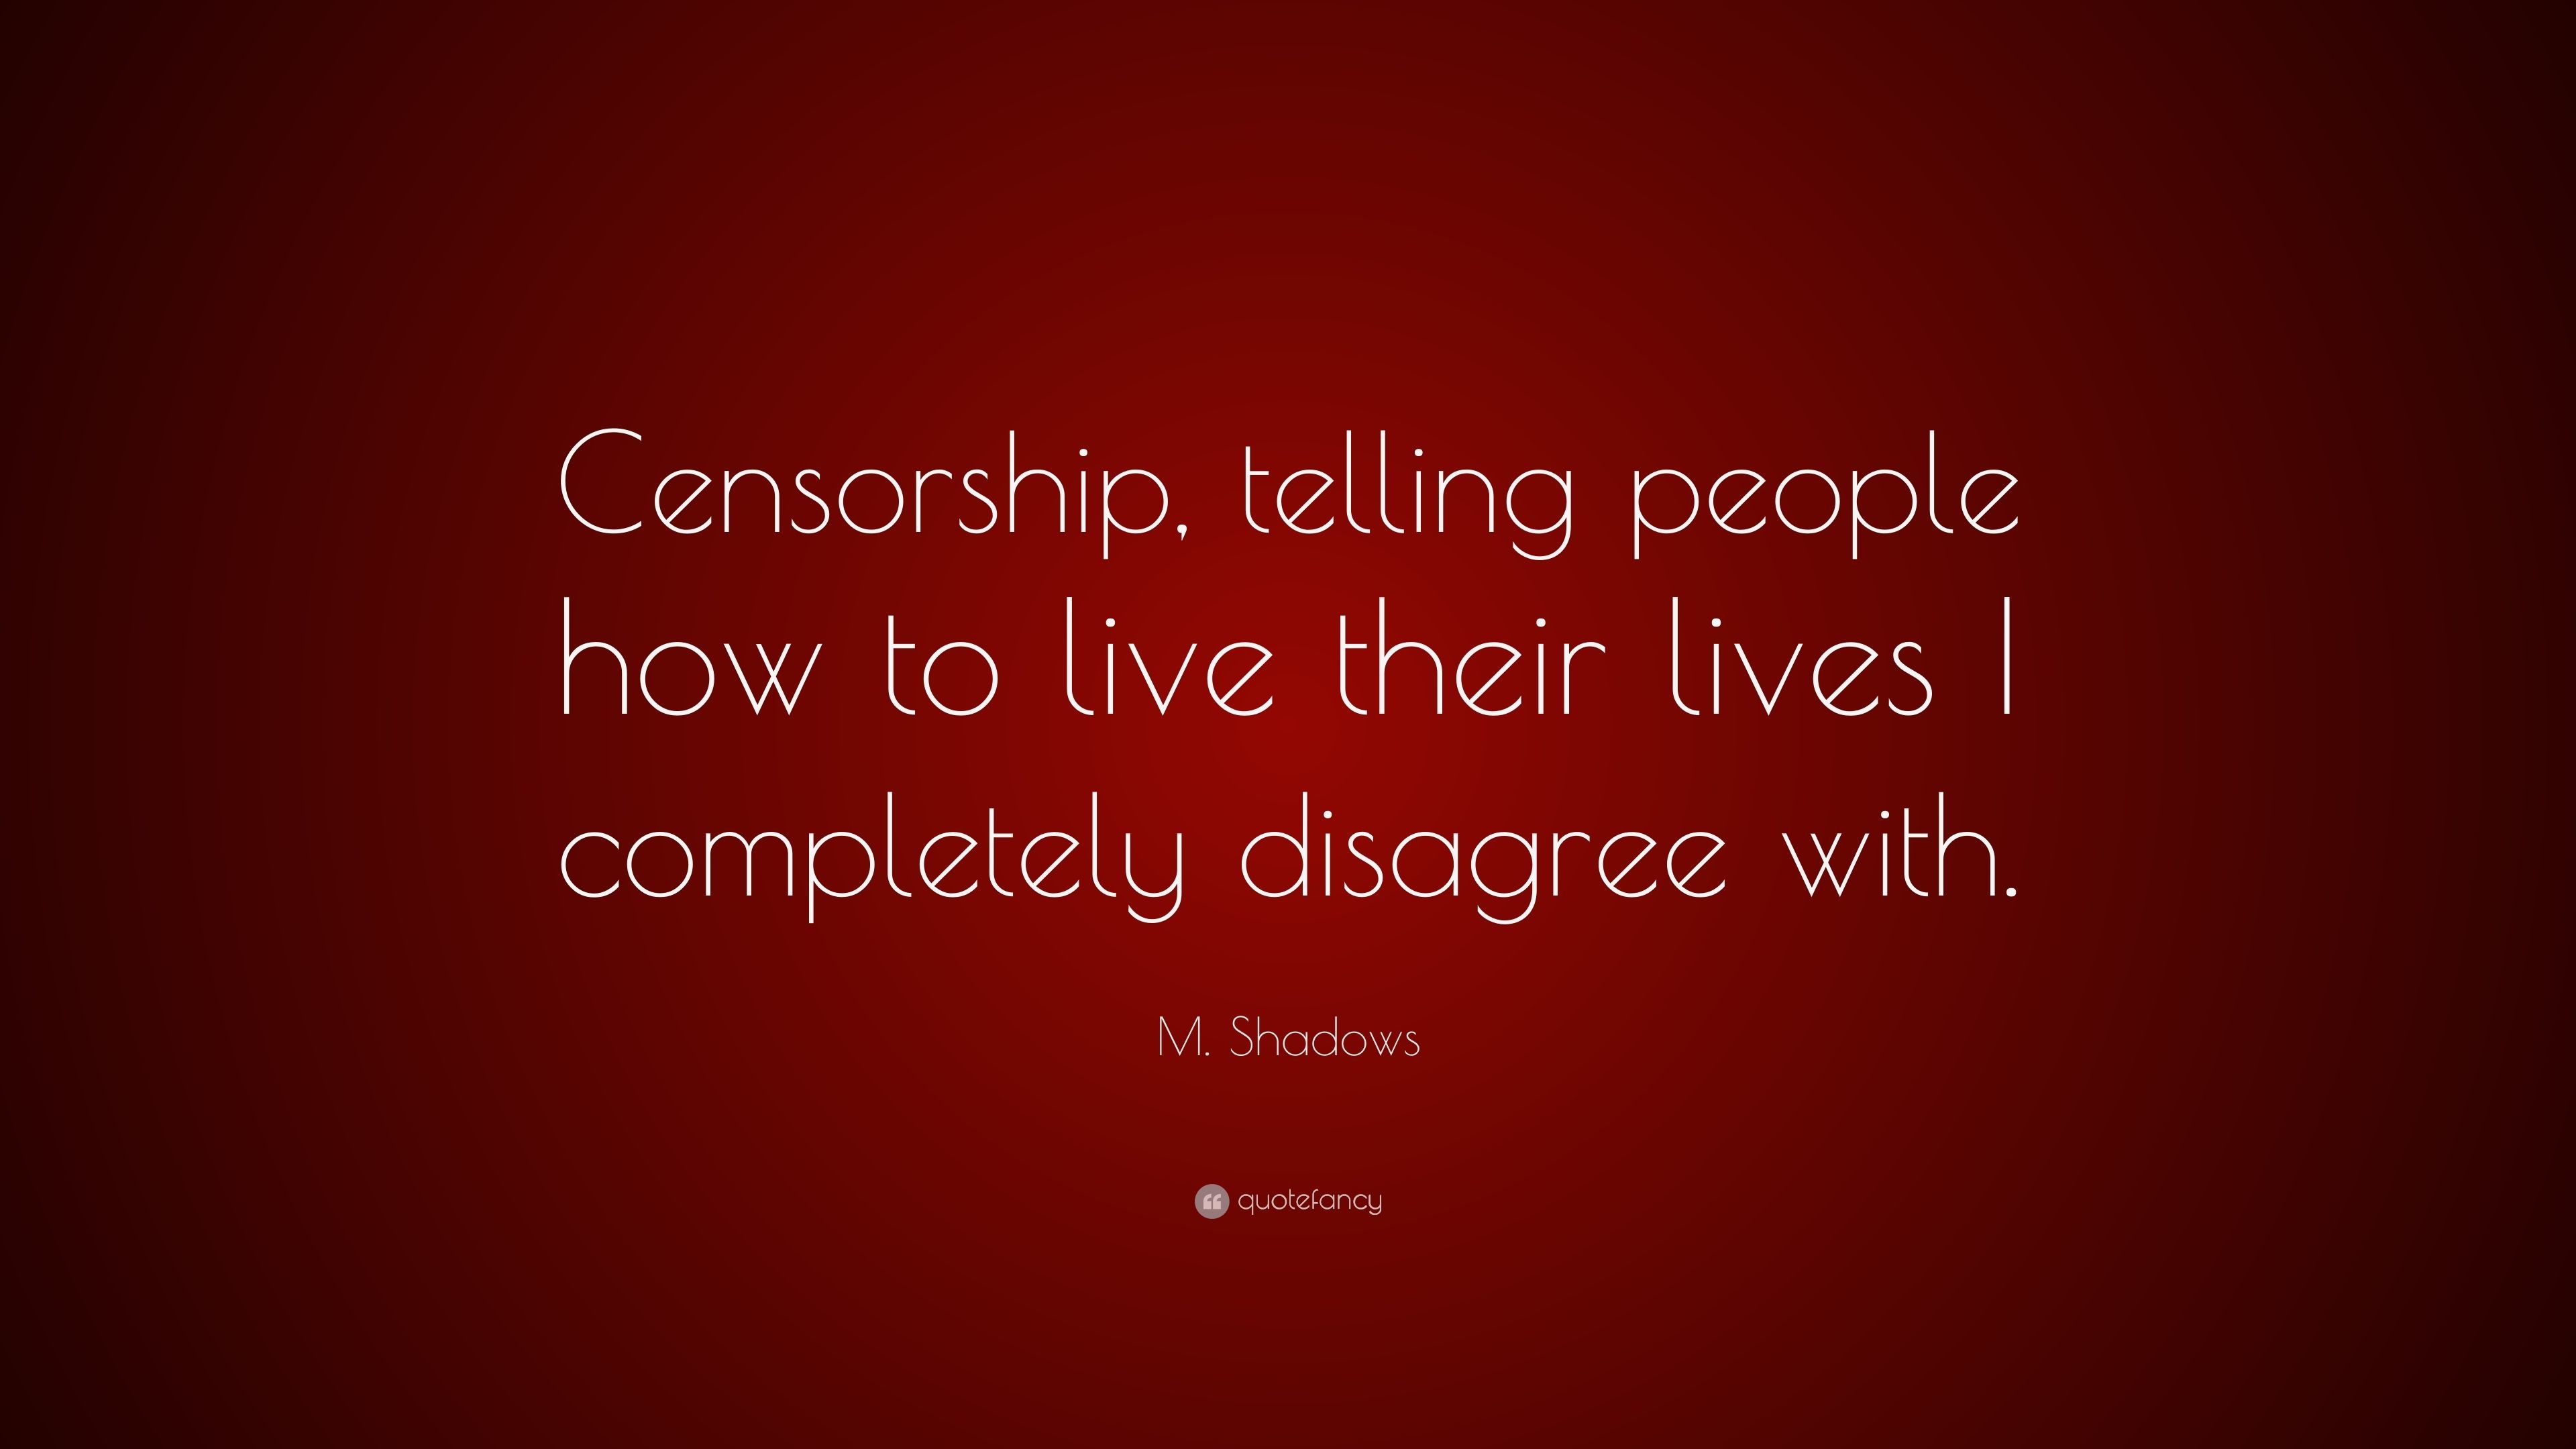 3840x2160 M. Shadows Quote: “Censorship, telling people how to live their lives I